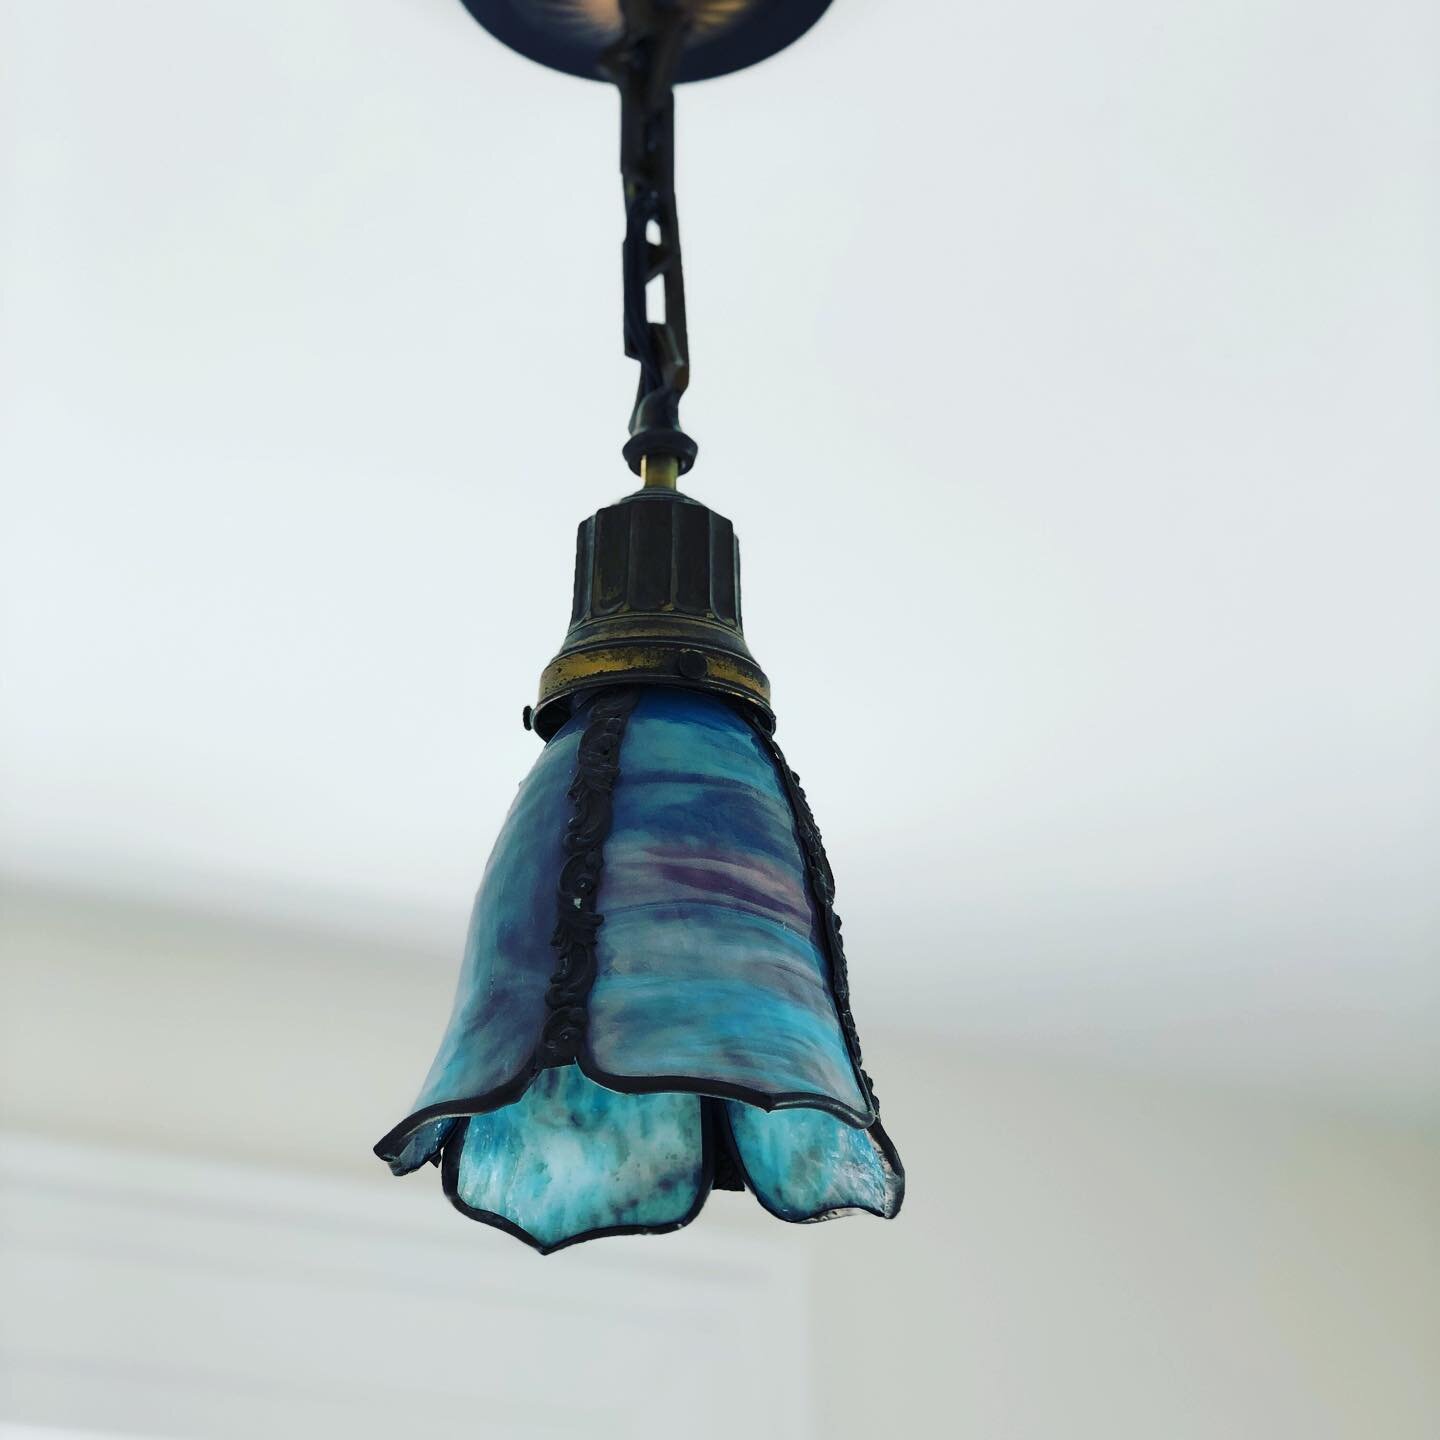 As we dug deep into updating this AMAZING property- we loved finding original pieces we could continue to showcase. 

This light fixture is just one of those pieces. 

I just love the melting of blues &amp; purples in the glass. It is focal point of 